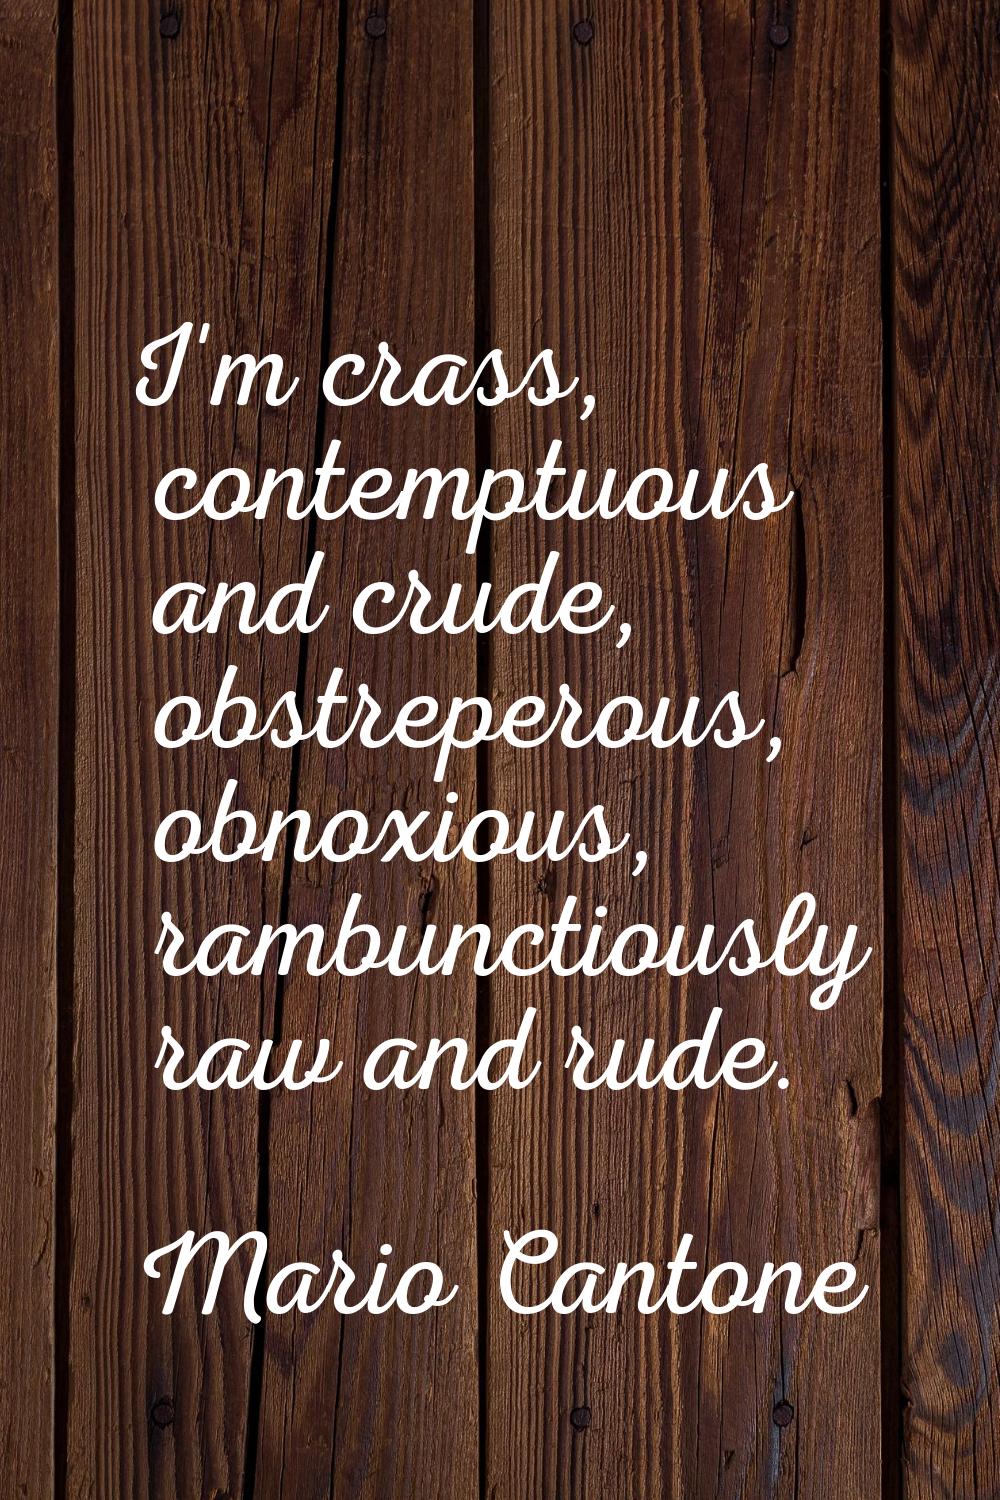 I'm crass, contemptuous and crude, obstreperous, obnoxious, rambunctiously raw and rude.